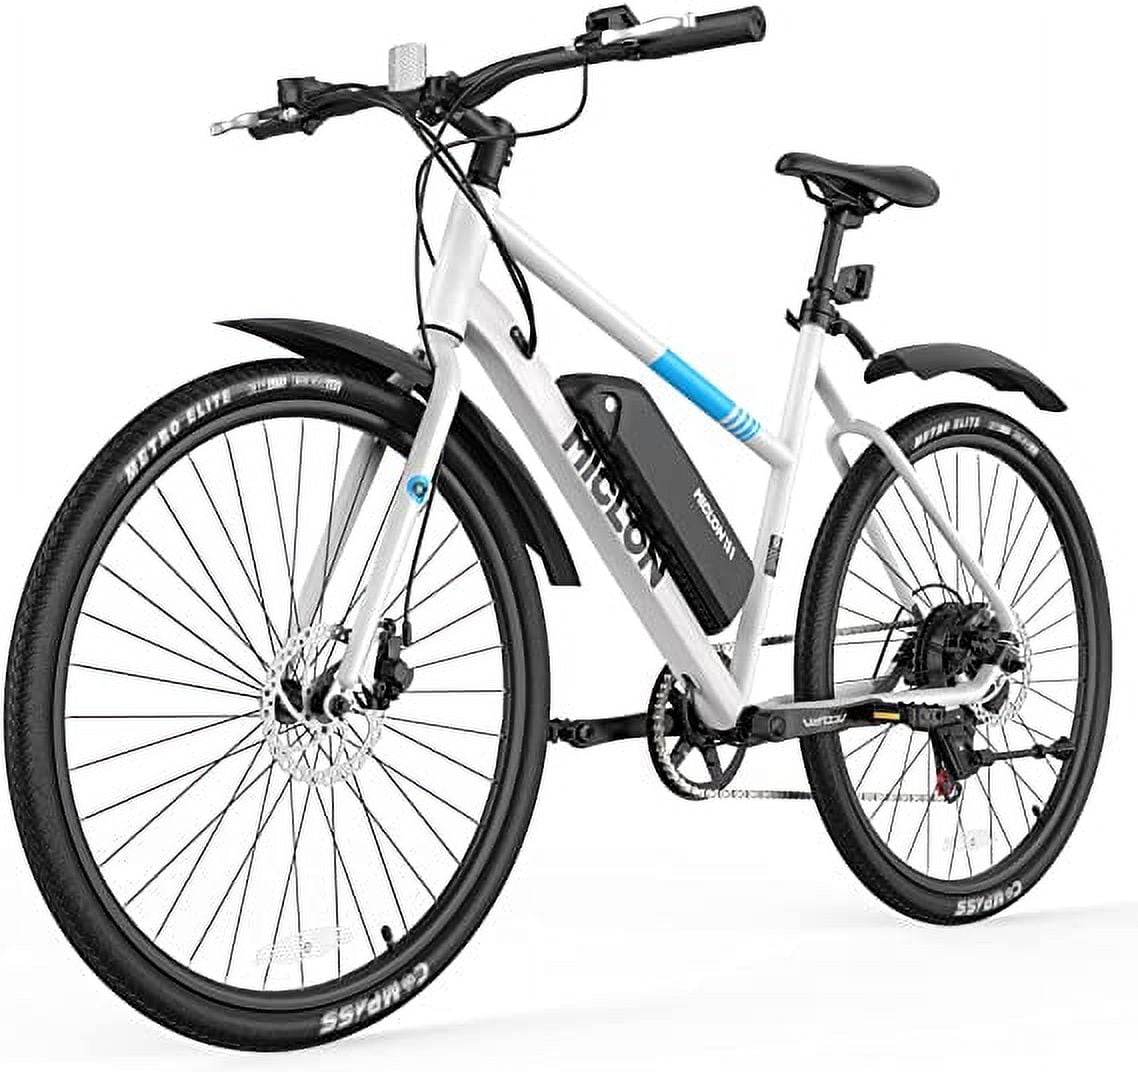 Range, Adult 44 White 27.5 City E-Bike, Bicycle, Electric Shimano 13Ah Miles 36V Electric Commuter In. MICLON 350W Bike, 7-Speed, Battery, 20Mph